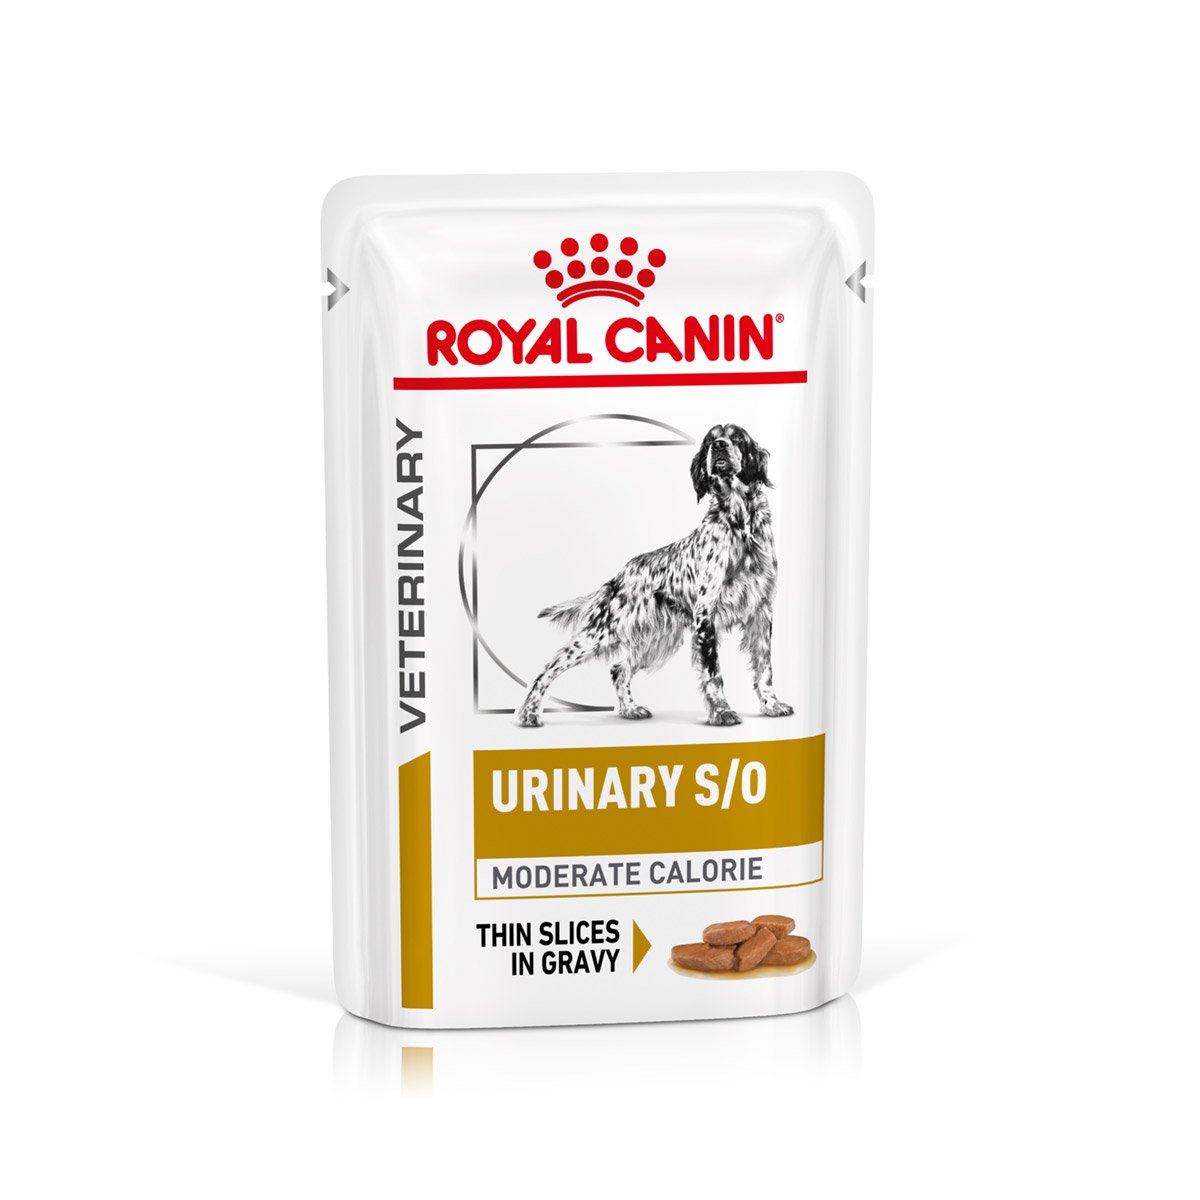 ROYAL CANIN® Veterinary URINARY S/O MODERATE CALORIE Nassfutter für Hunde 48x100g von Royal Canin